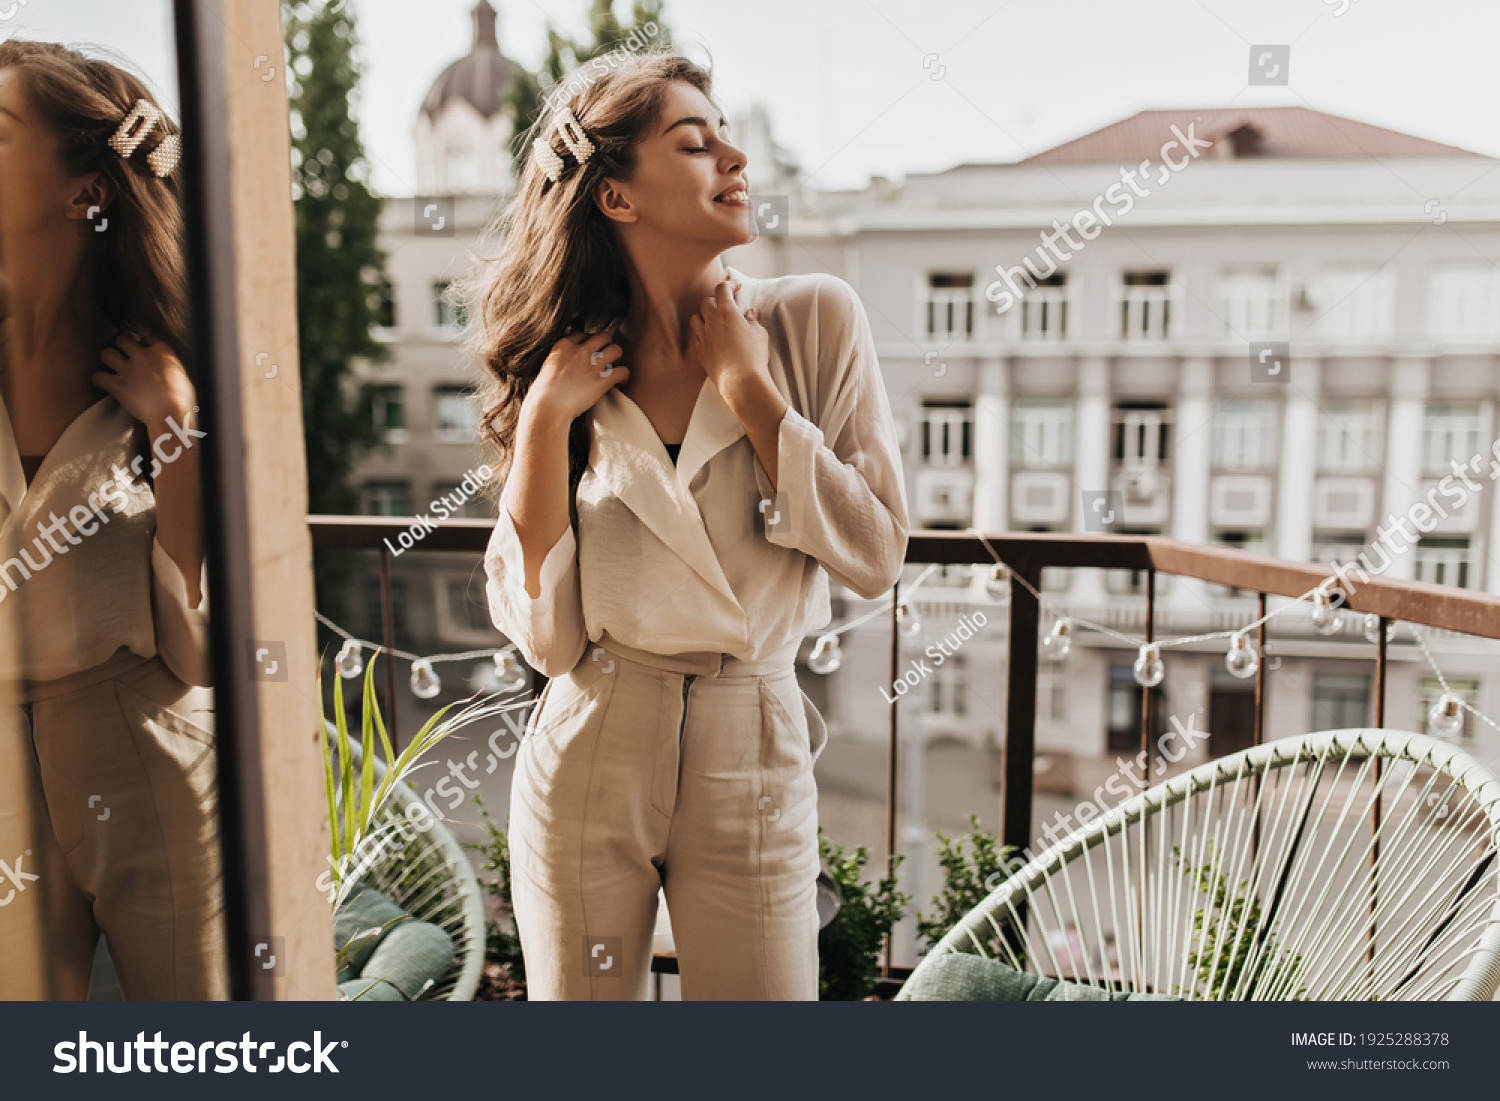 Curly woman enjoys sunny day on terrace. Pretty dark-haired lady in beige blouse and stylish pants poses on balcony #1925288378